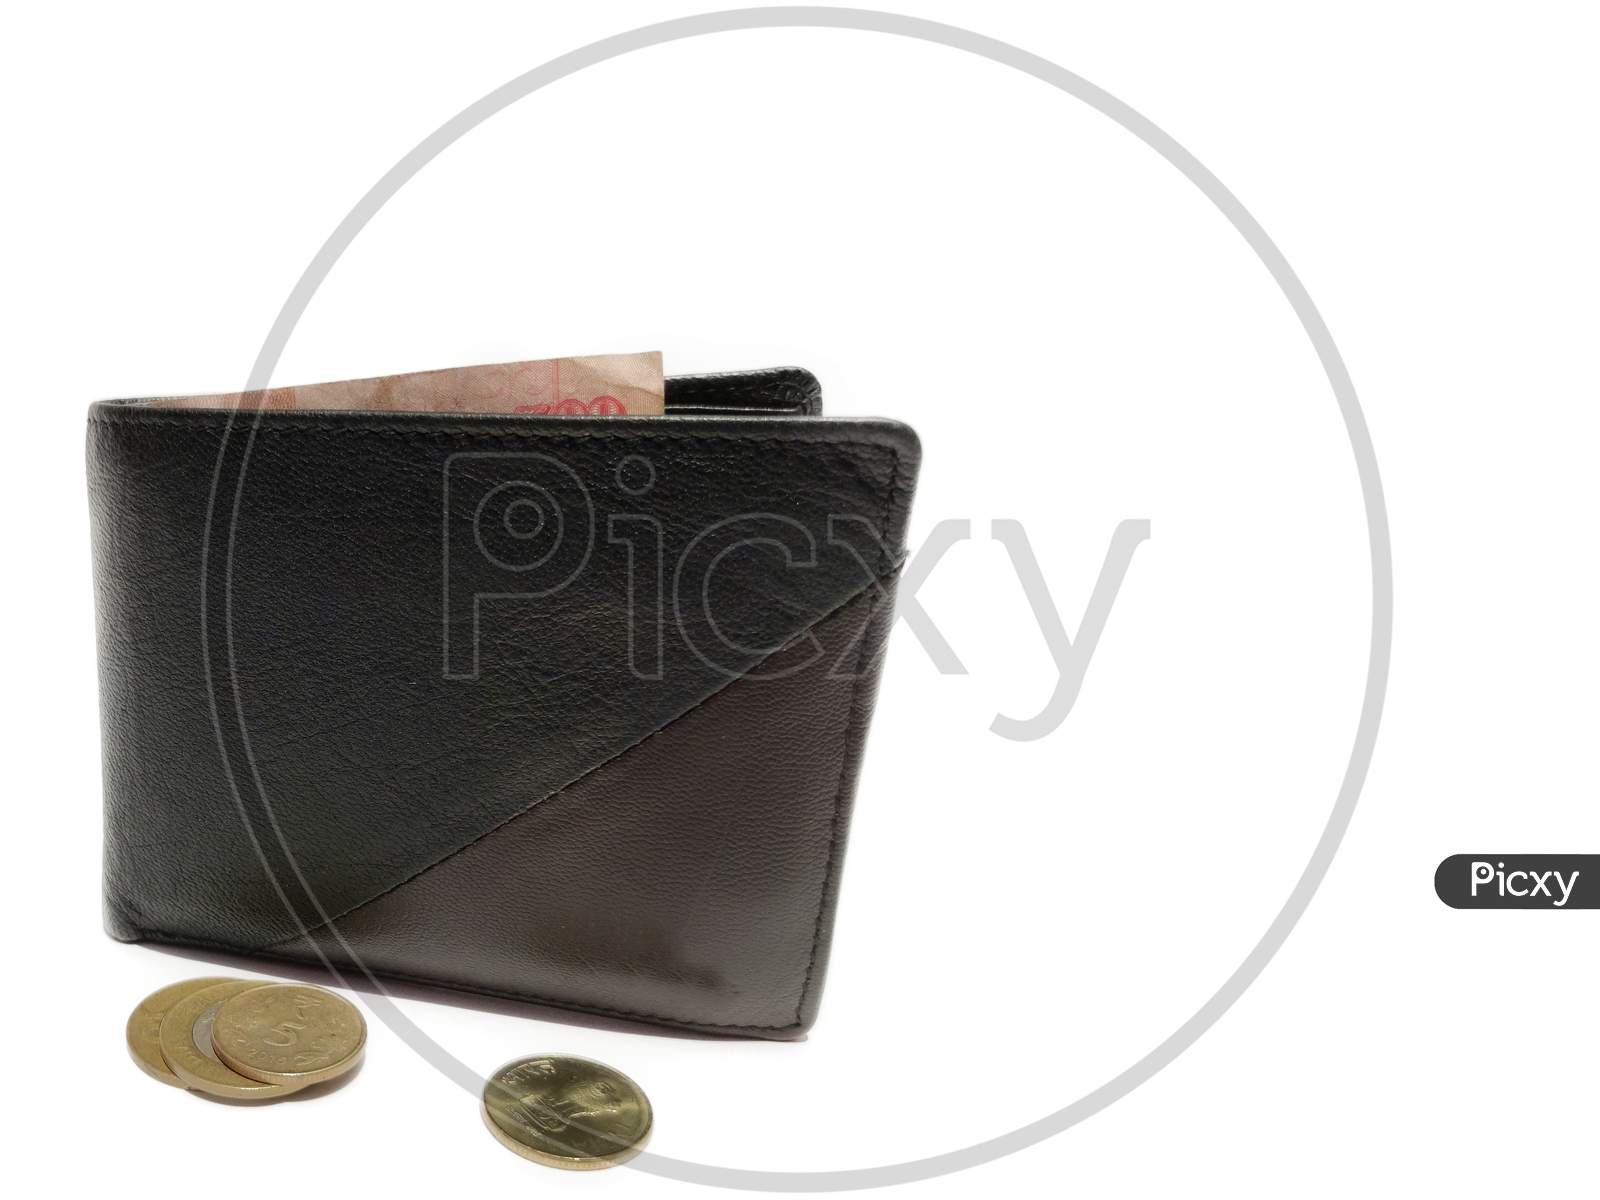 Money in wallet with coins Outside on White background